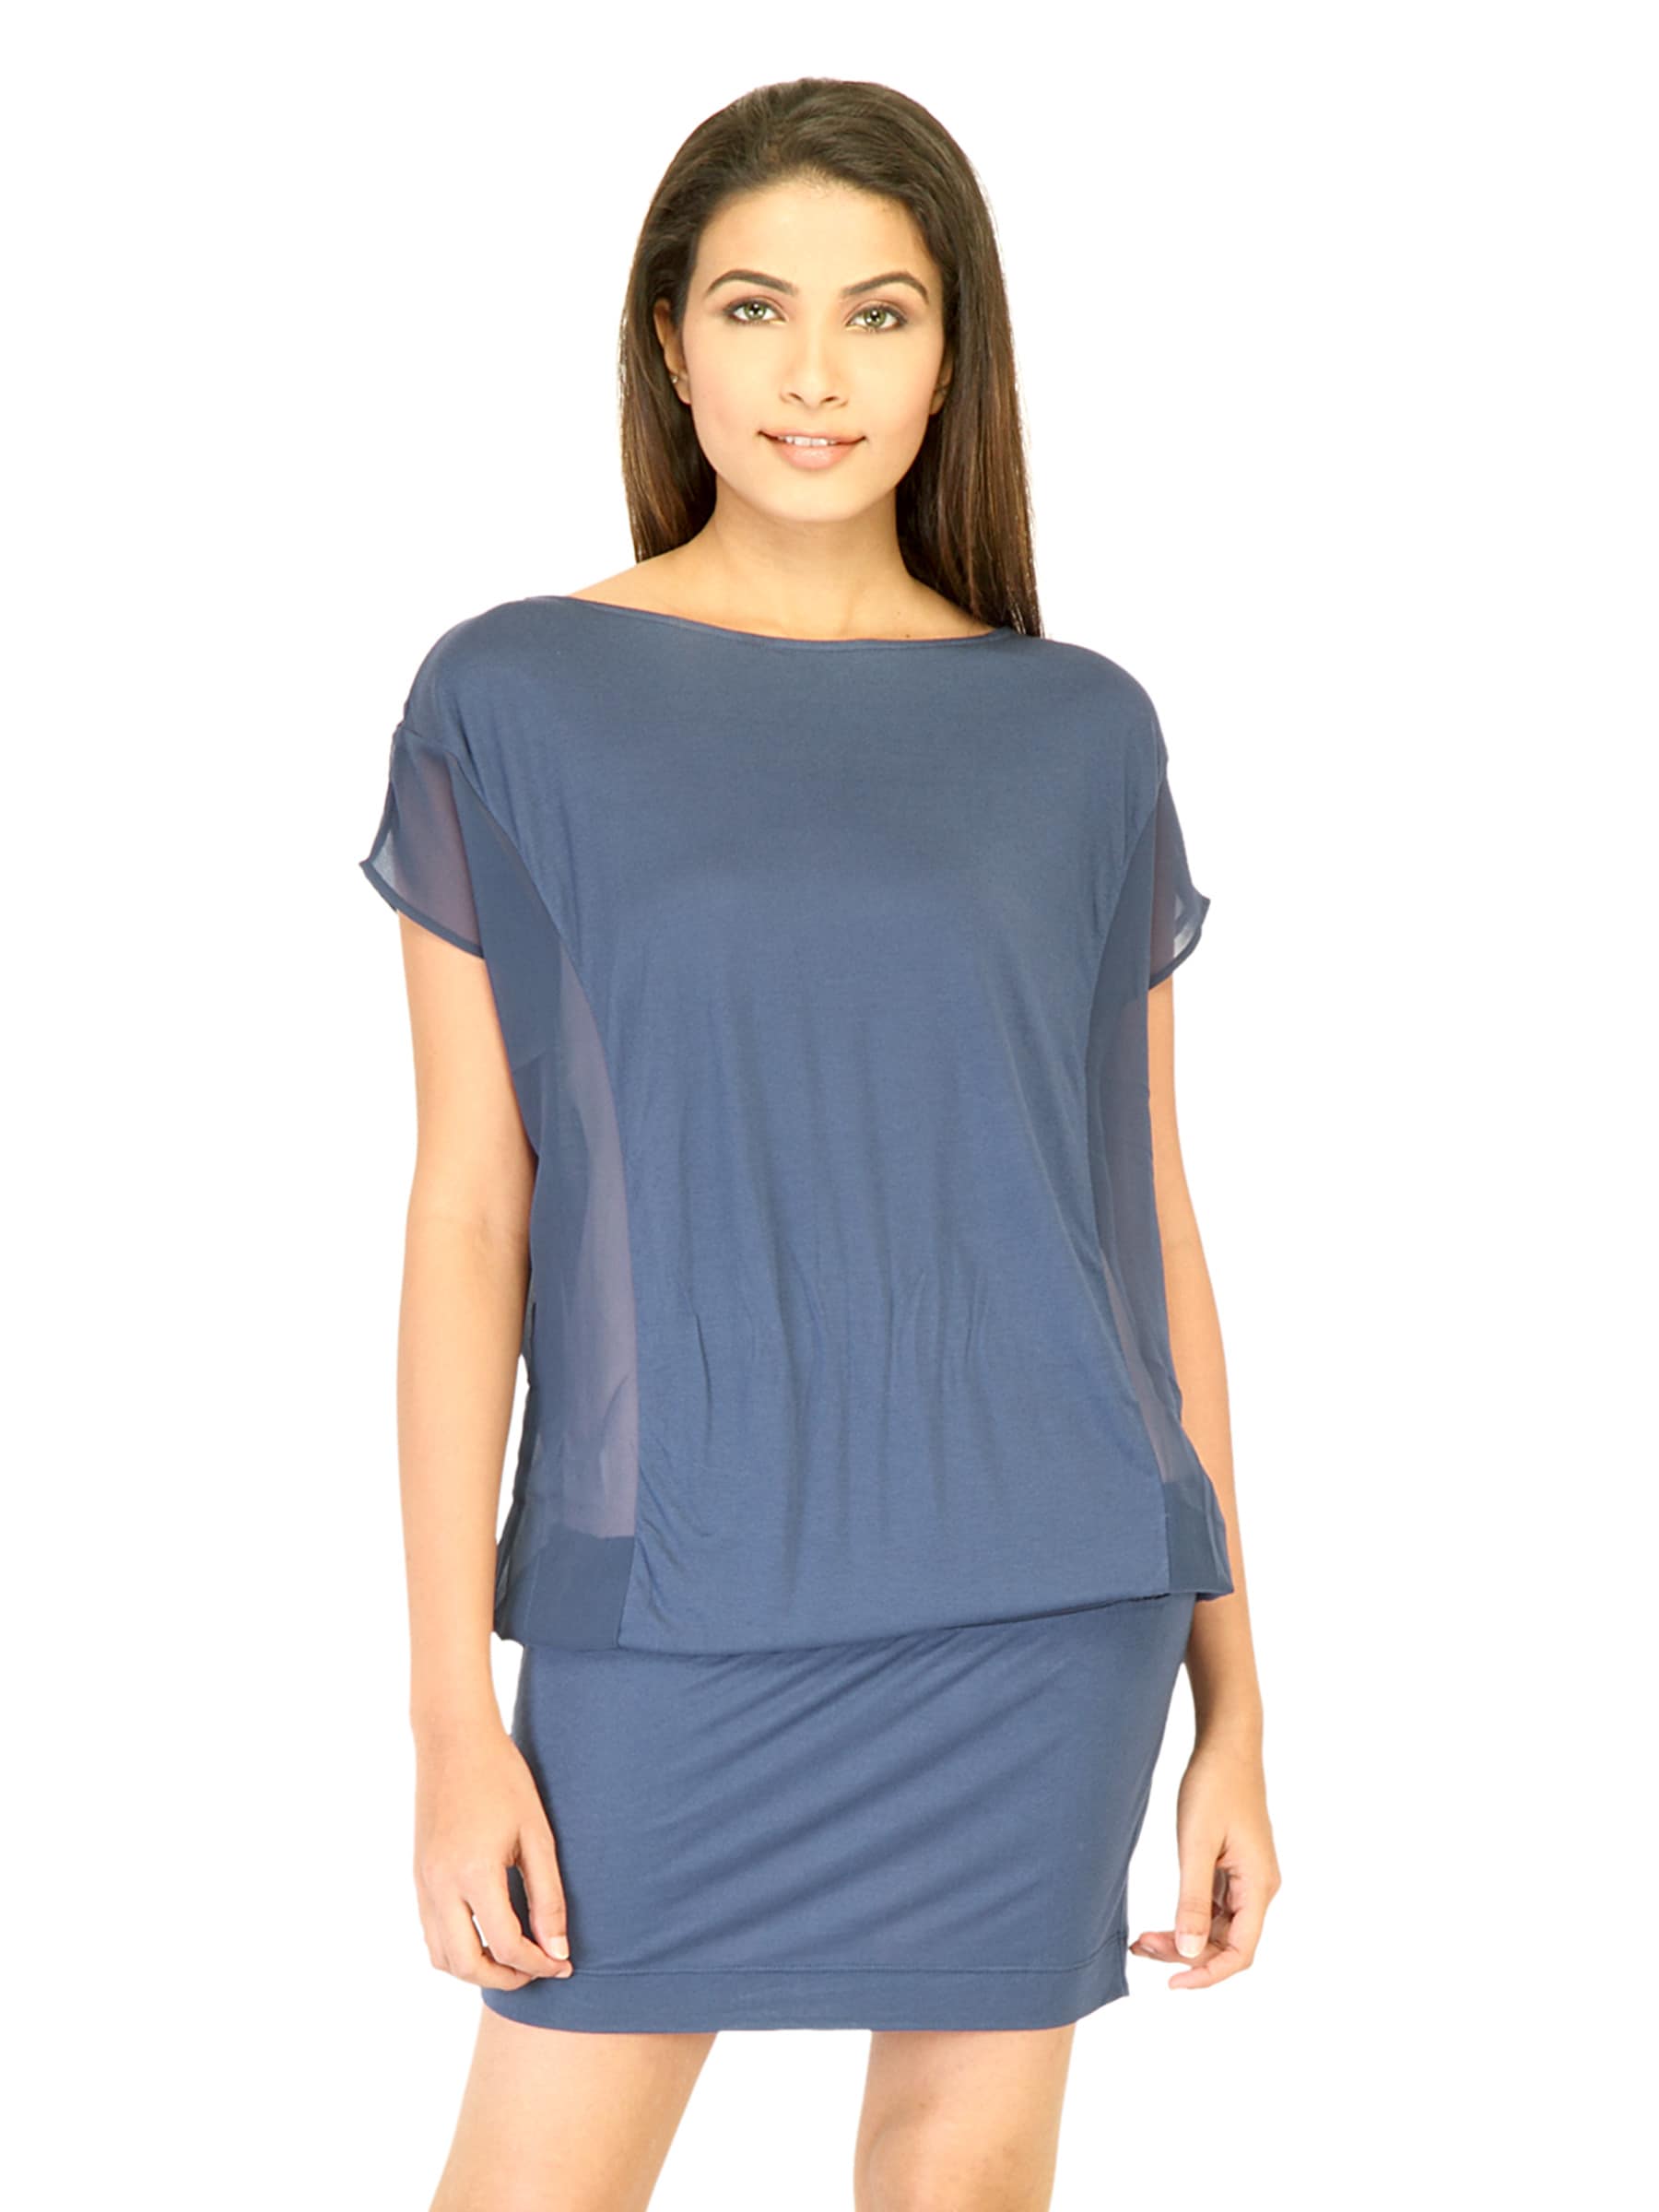 United Colors of Benetton Women Solid Blue Tunic